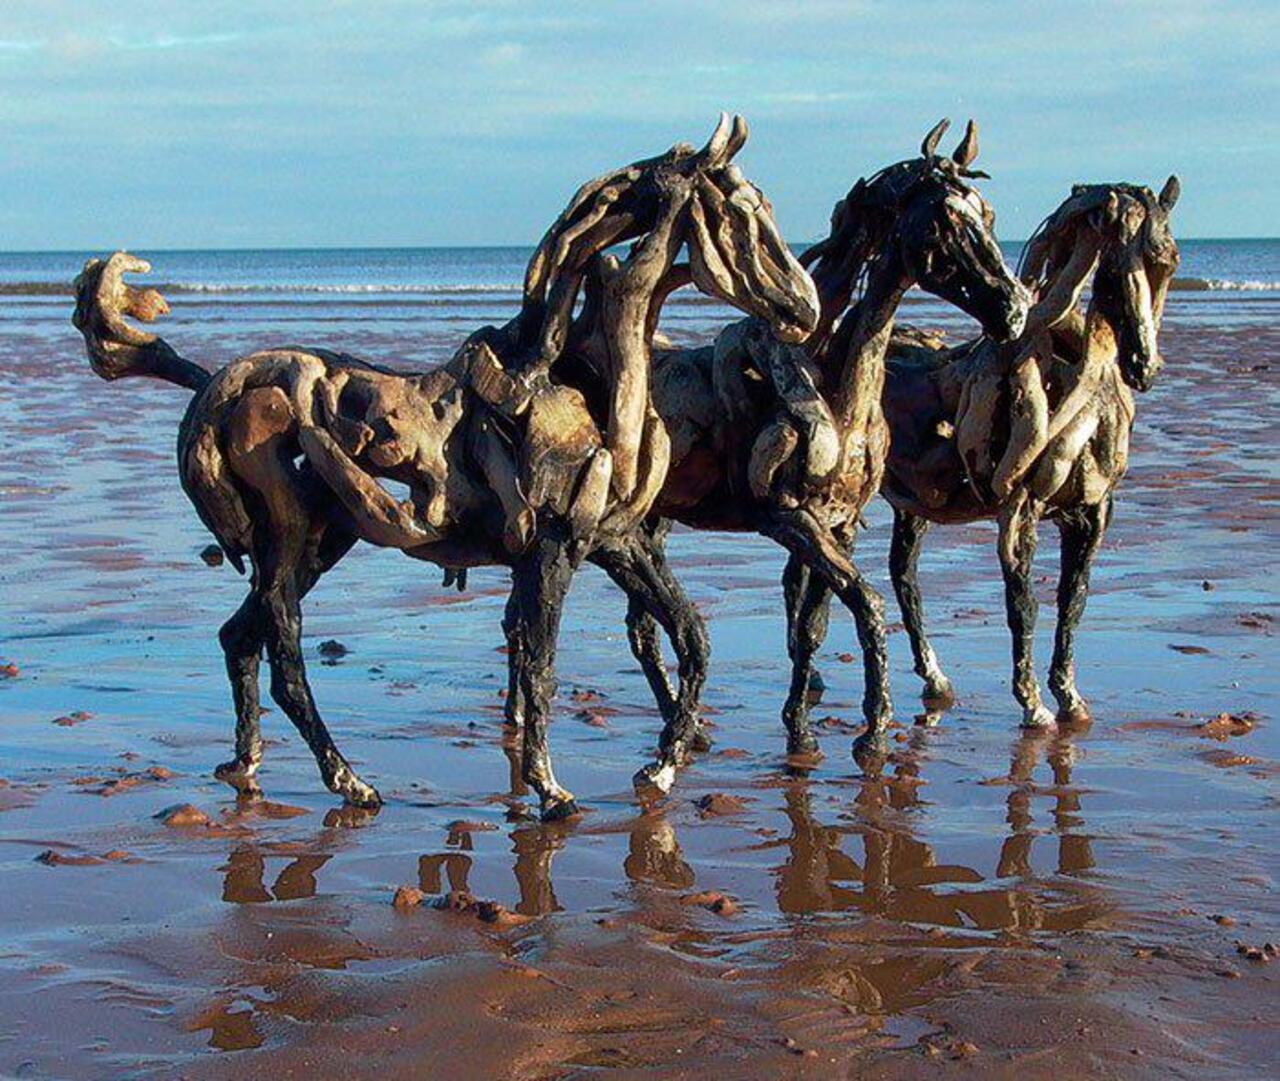 The British artist and sculptor Heather Jansch. strong and emblematic sculptures made entirely with wooden horses. http://t.co/pH6h3vr6lf